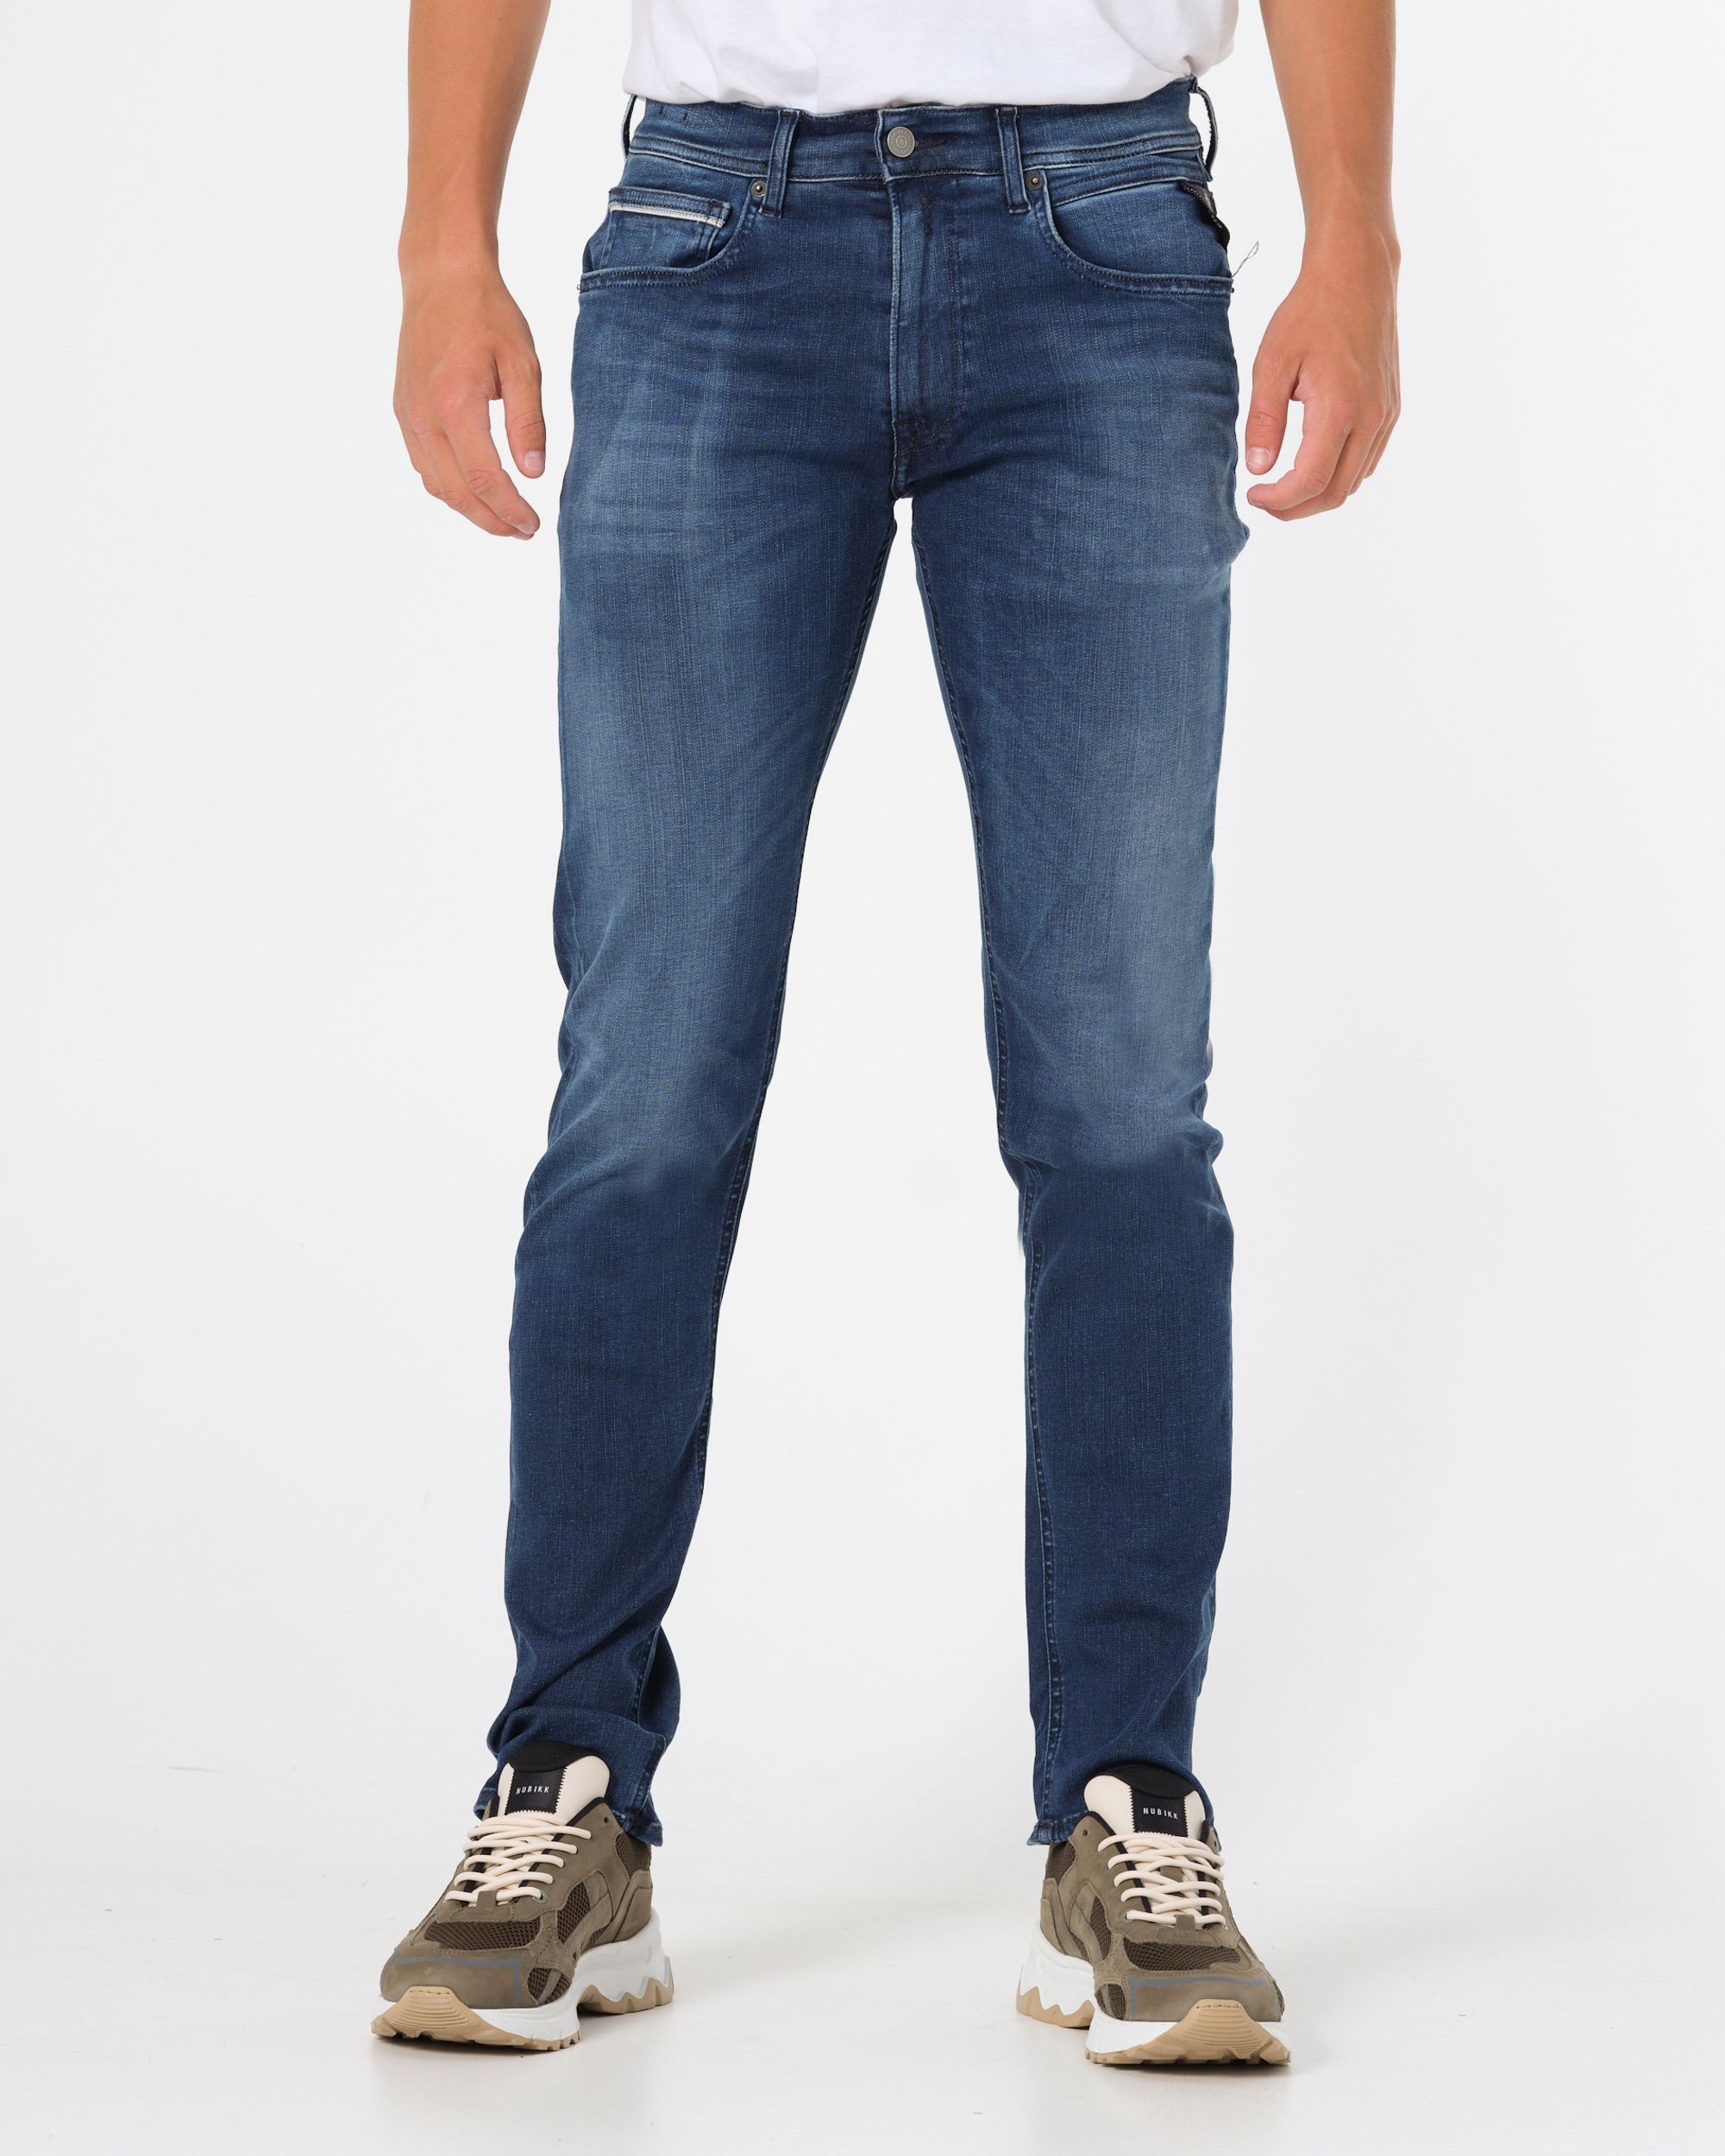 Replay Hypercloud Grover Jeans | Shop nu - OFM.